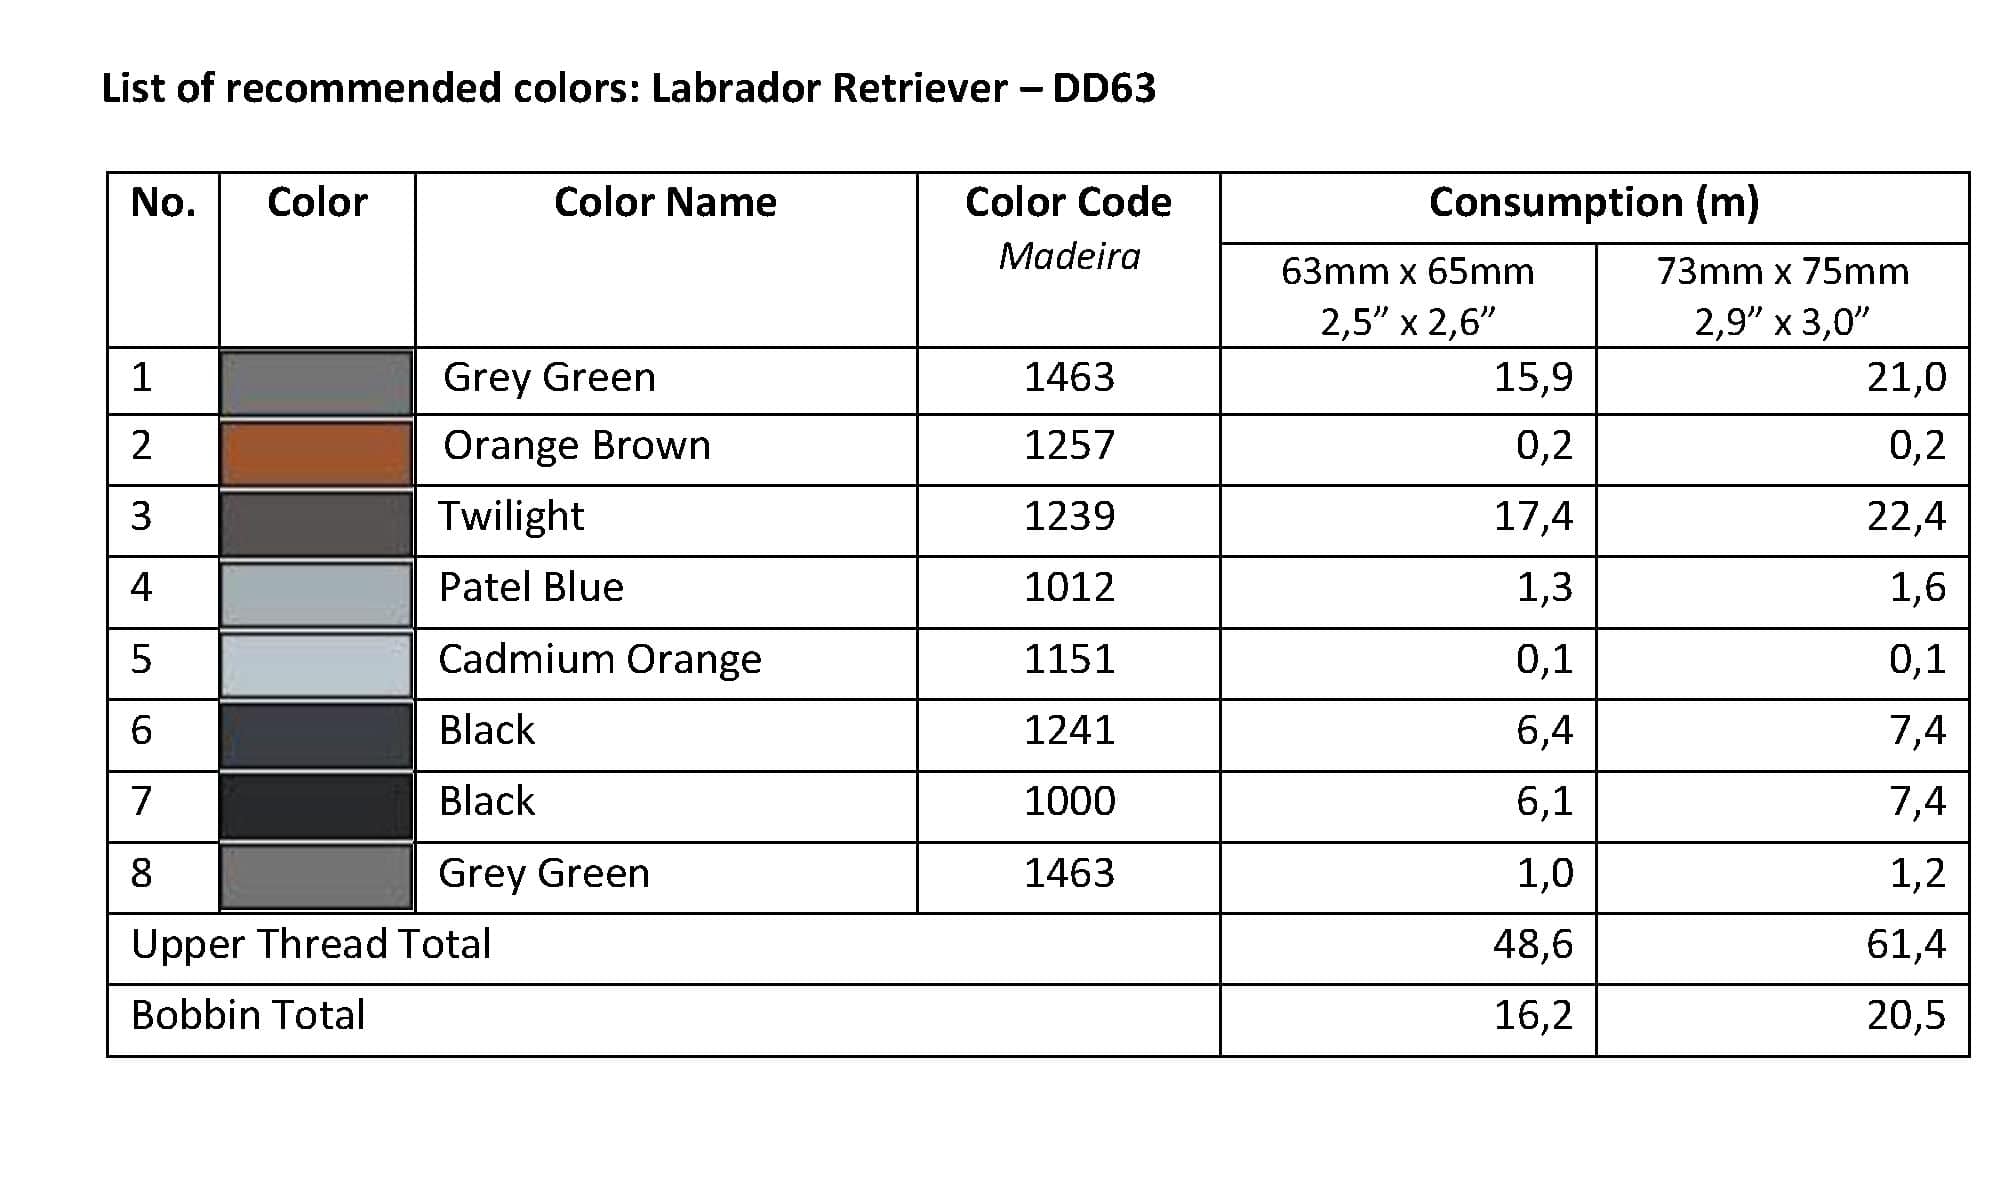 List of Recommended Colors -Labrador Retriever DD63